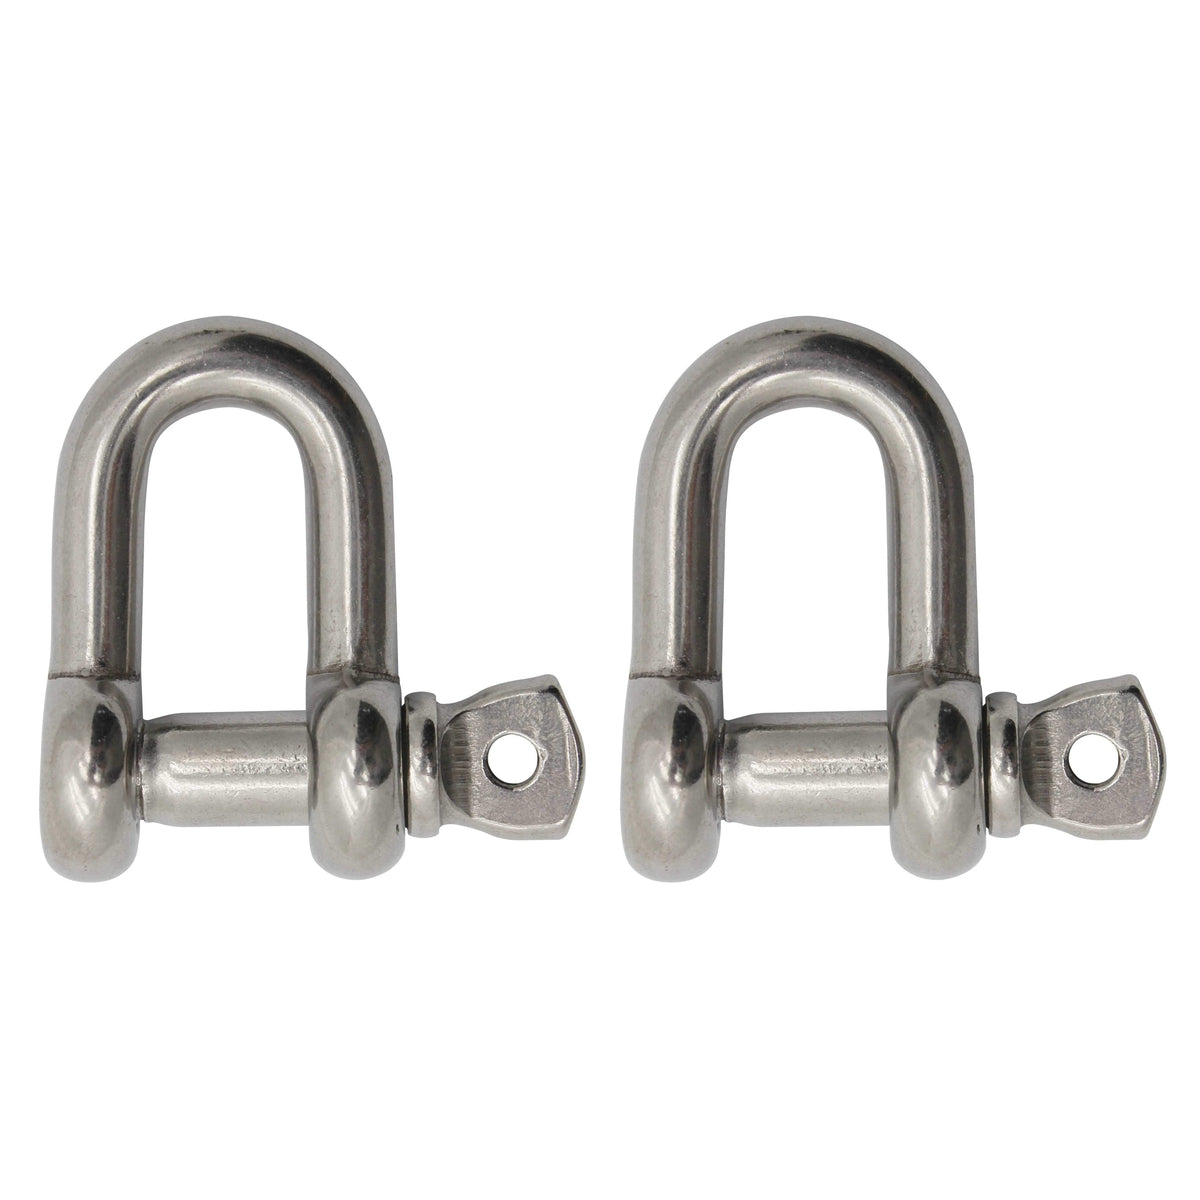 Extreme Max BoatTector SS Chain Shackle 1/2" 2-pk #3006.8273.2